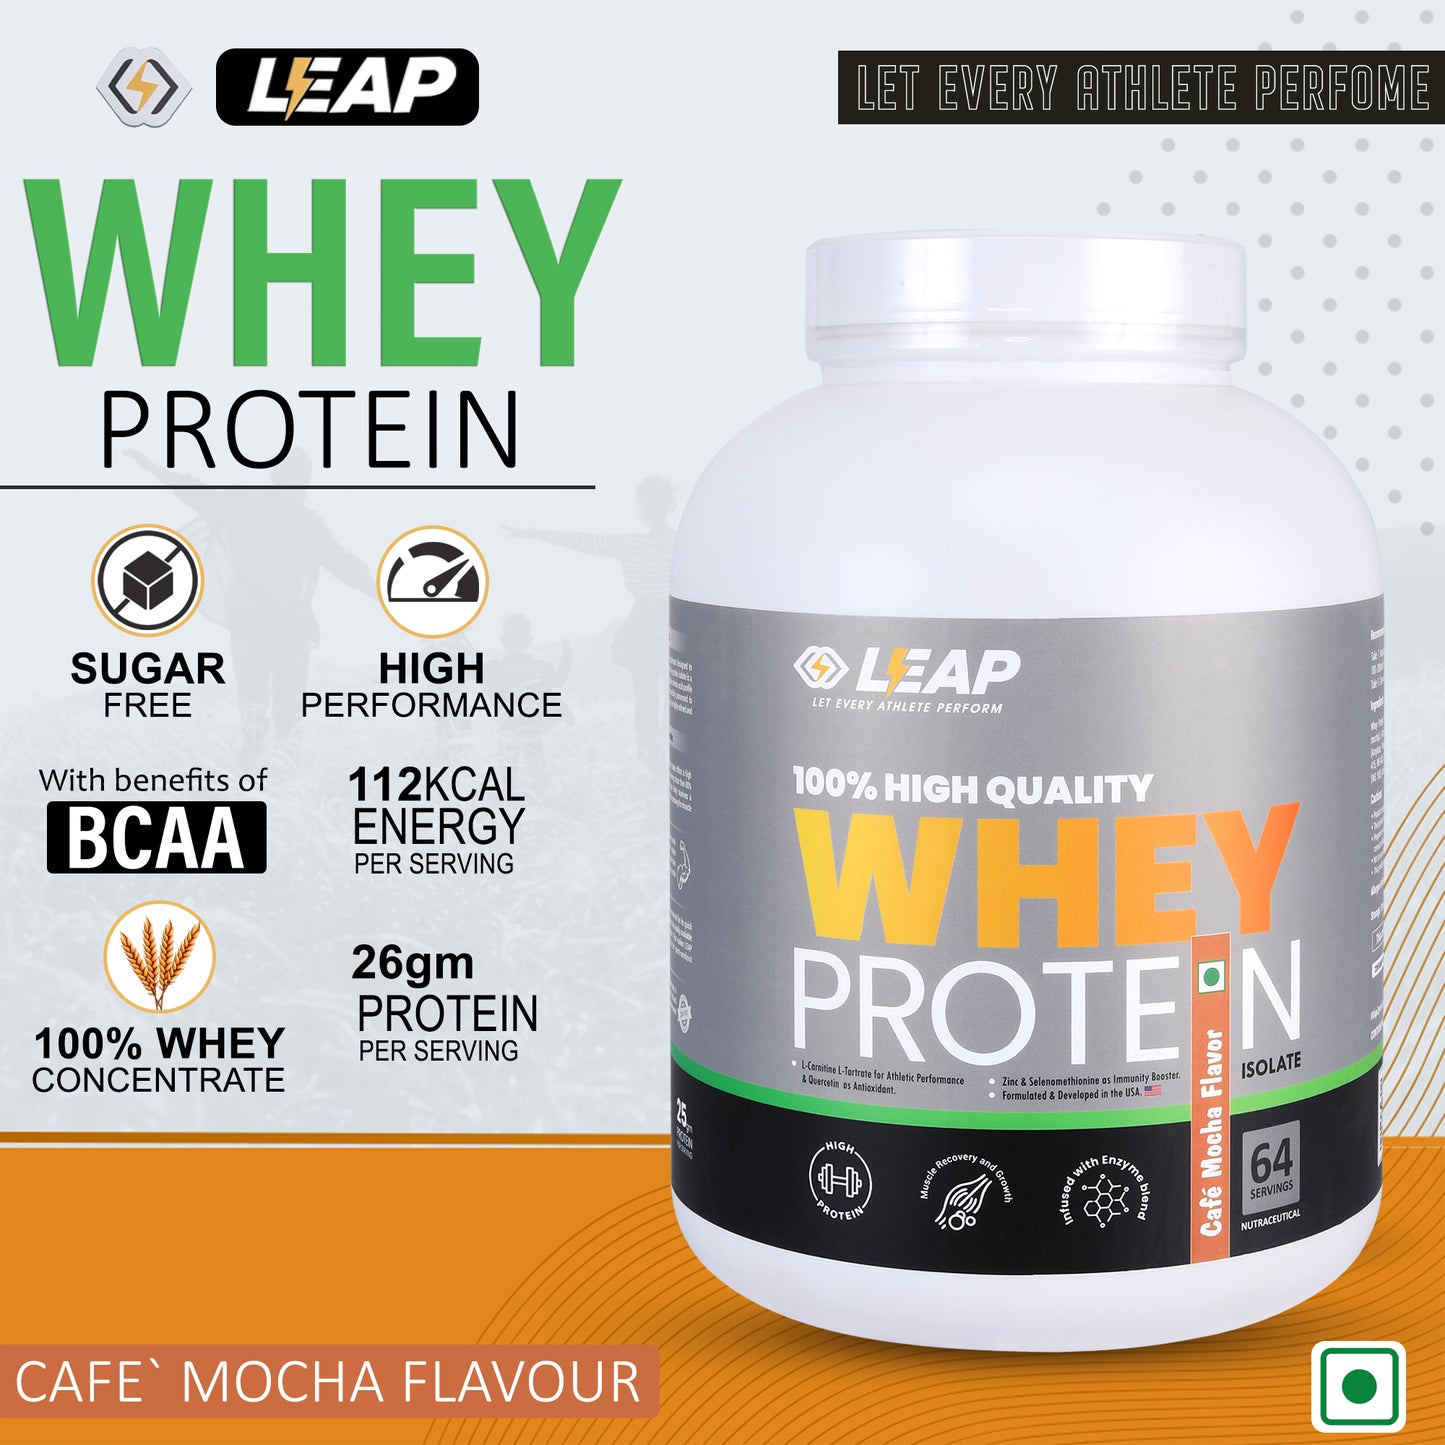 Leap Whey Protein Isolate-Cafe Mocha flavor-2KG